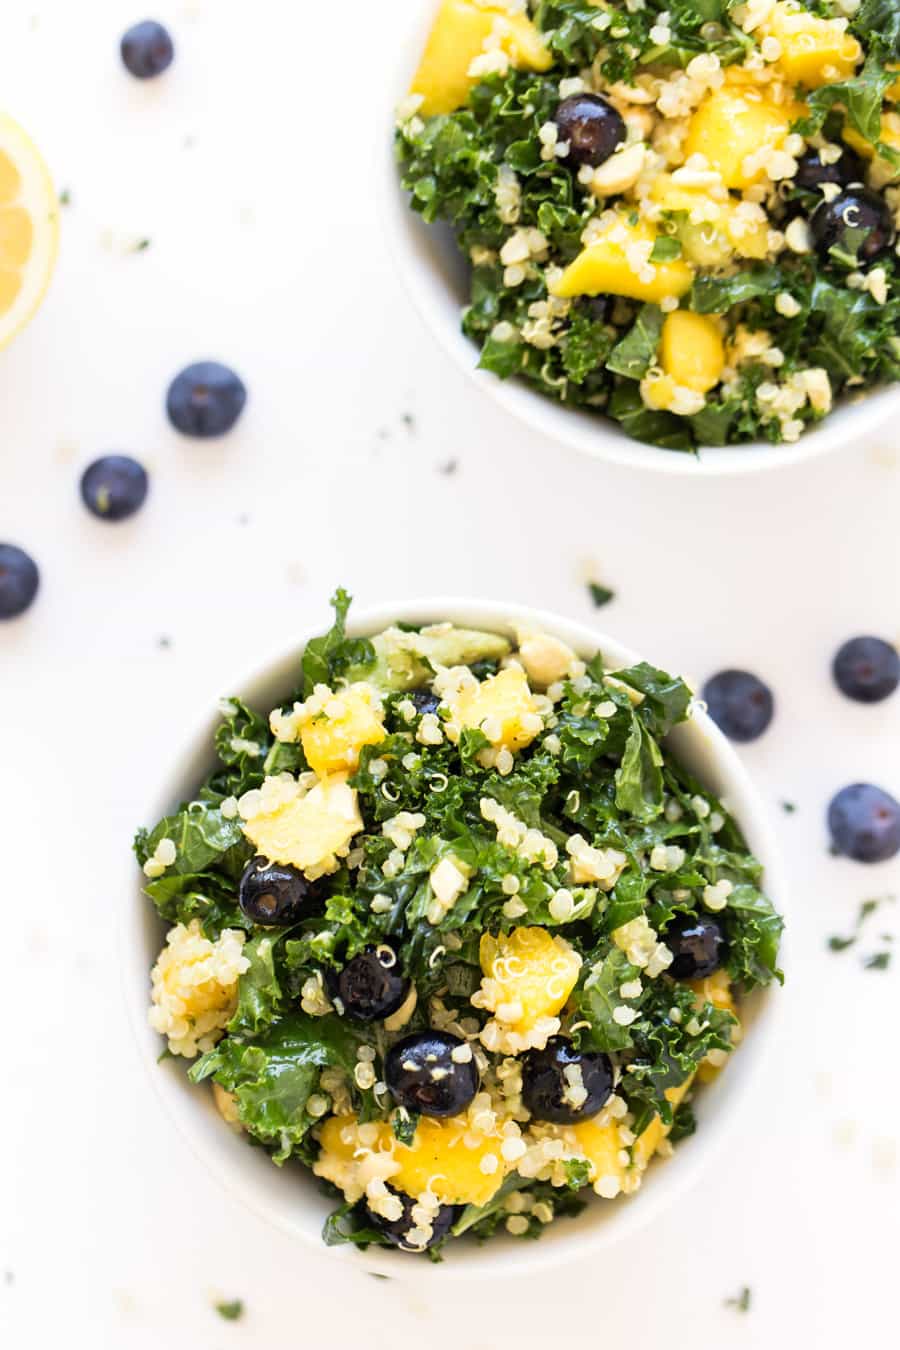 A healthy, nutrient-packed salad, this Tropical Kale & Quinoa Power Salad is a perfect lunch or side dish recipe. Comes together in 10 minutes and stores well for leftovers!